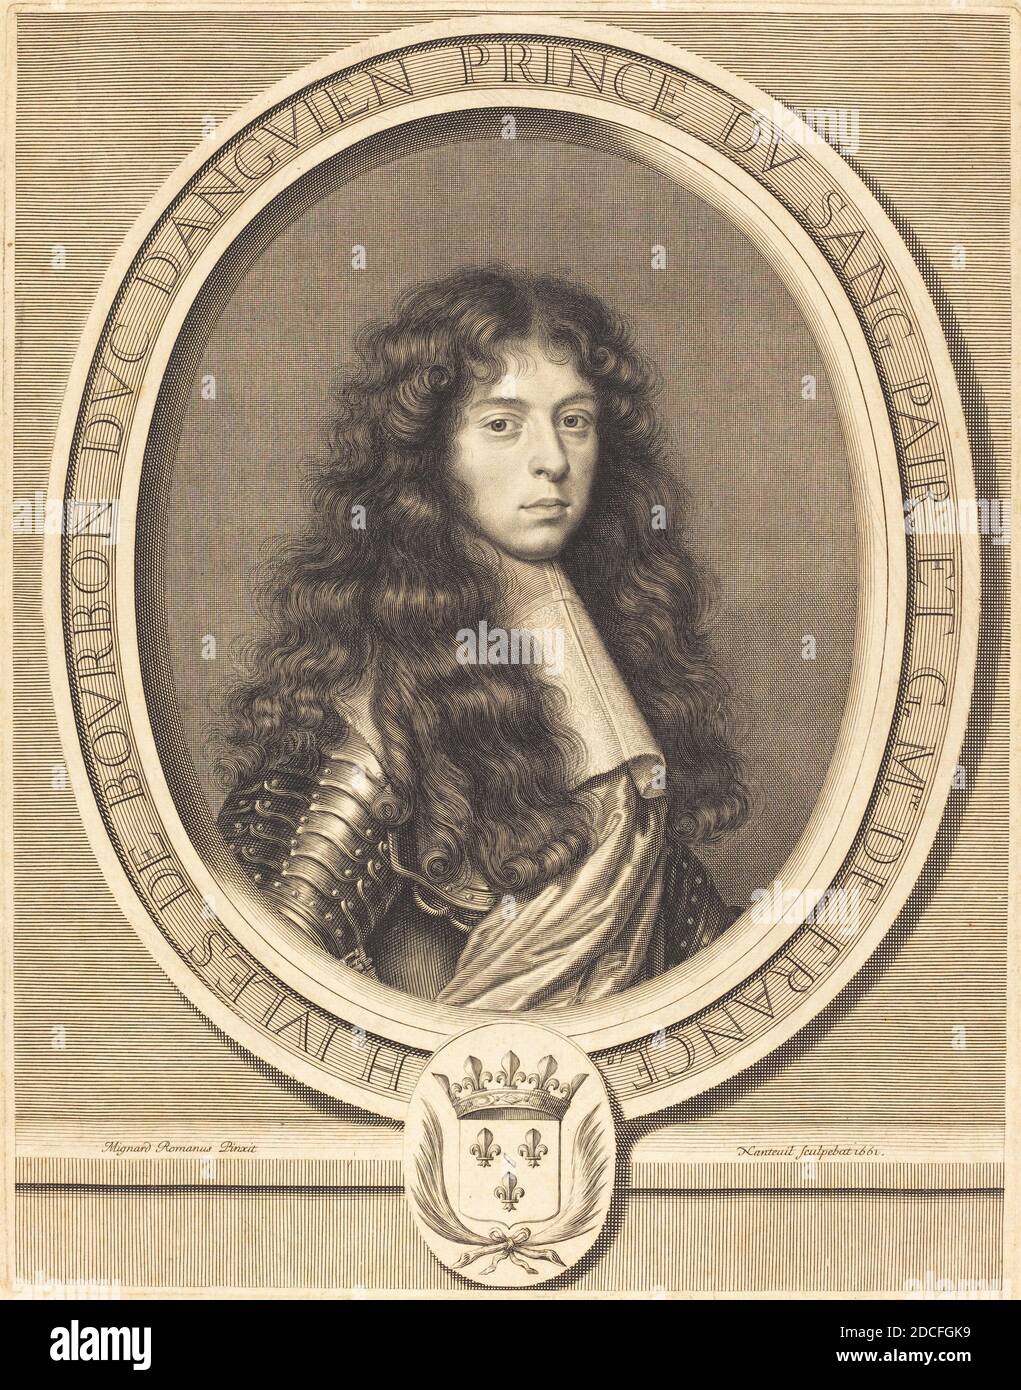 Robert Nanteuil, (artist), French, 1623 - 1678, Pierre Mignard I, (artist after), French, 1612 - 1695, Jules, Duc d'Enghien, 1661, engraving Stock Photo